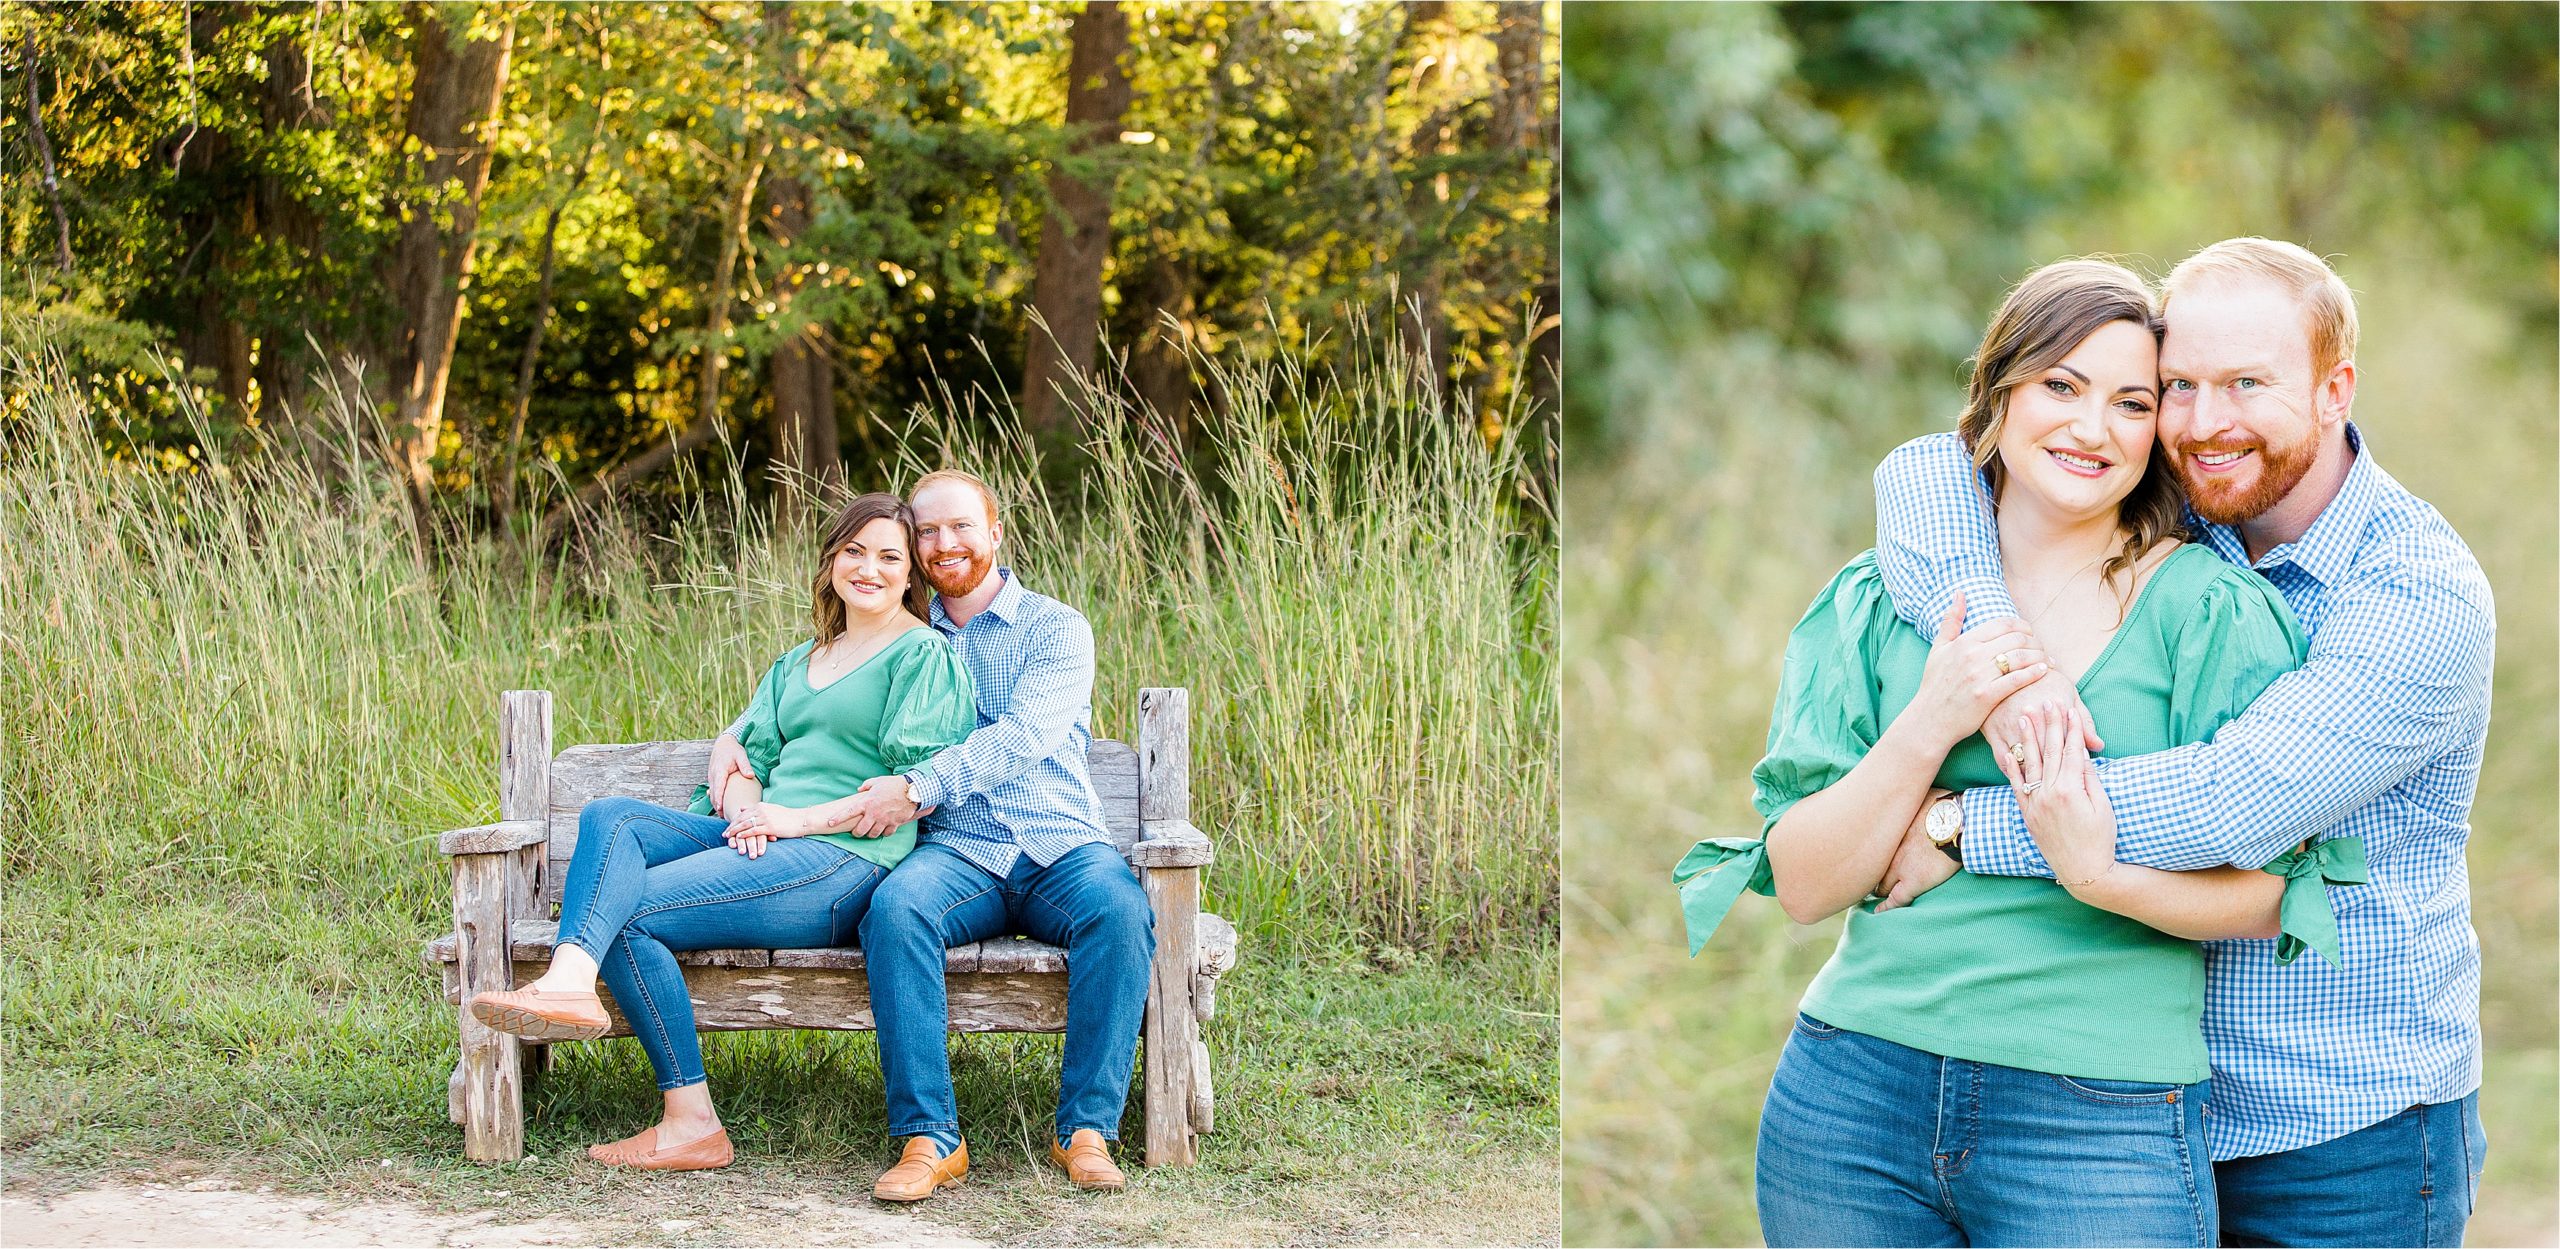 A couple hugs and embraces on a bench during their sunny fall engagement session at Cibolo Creek Nature Center in Boerne, Texas